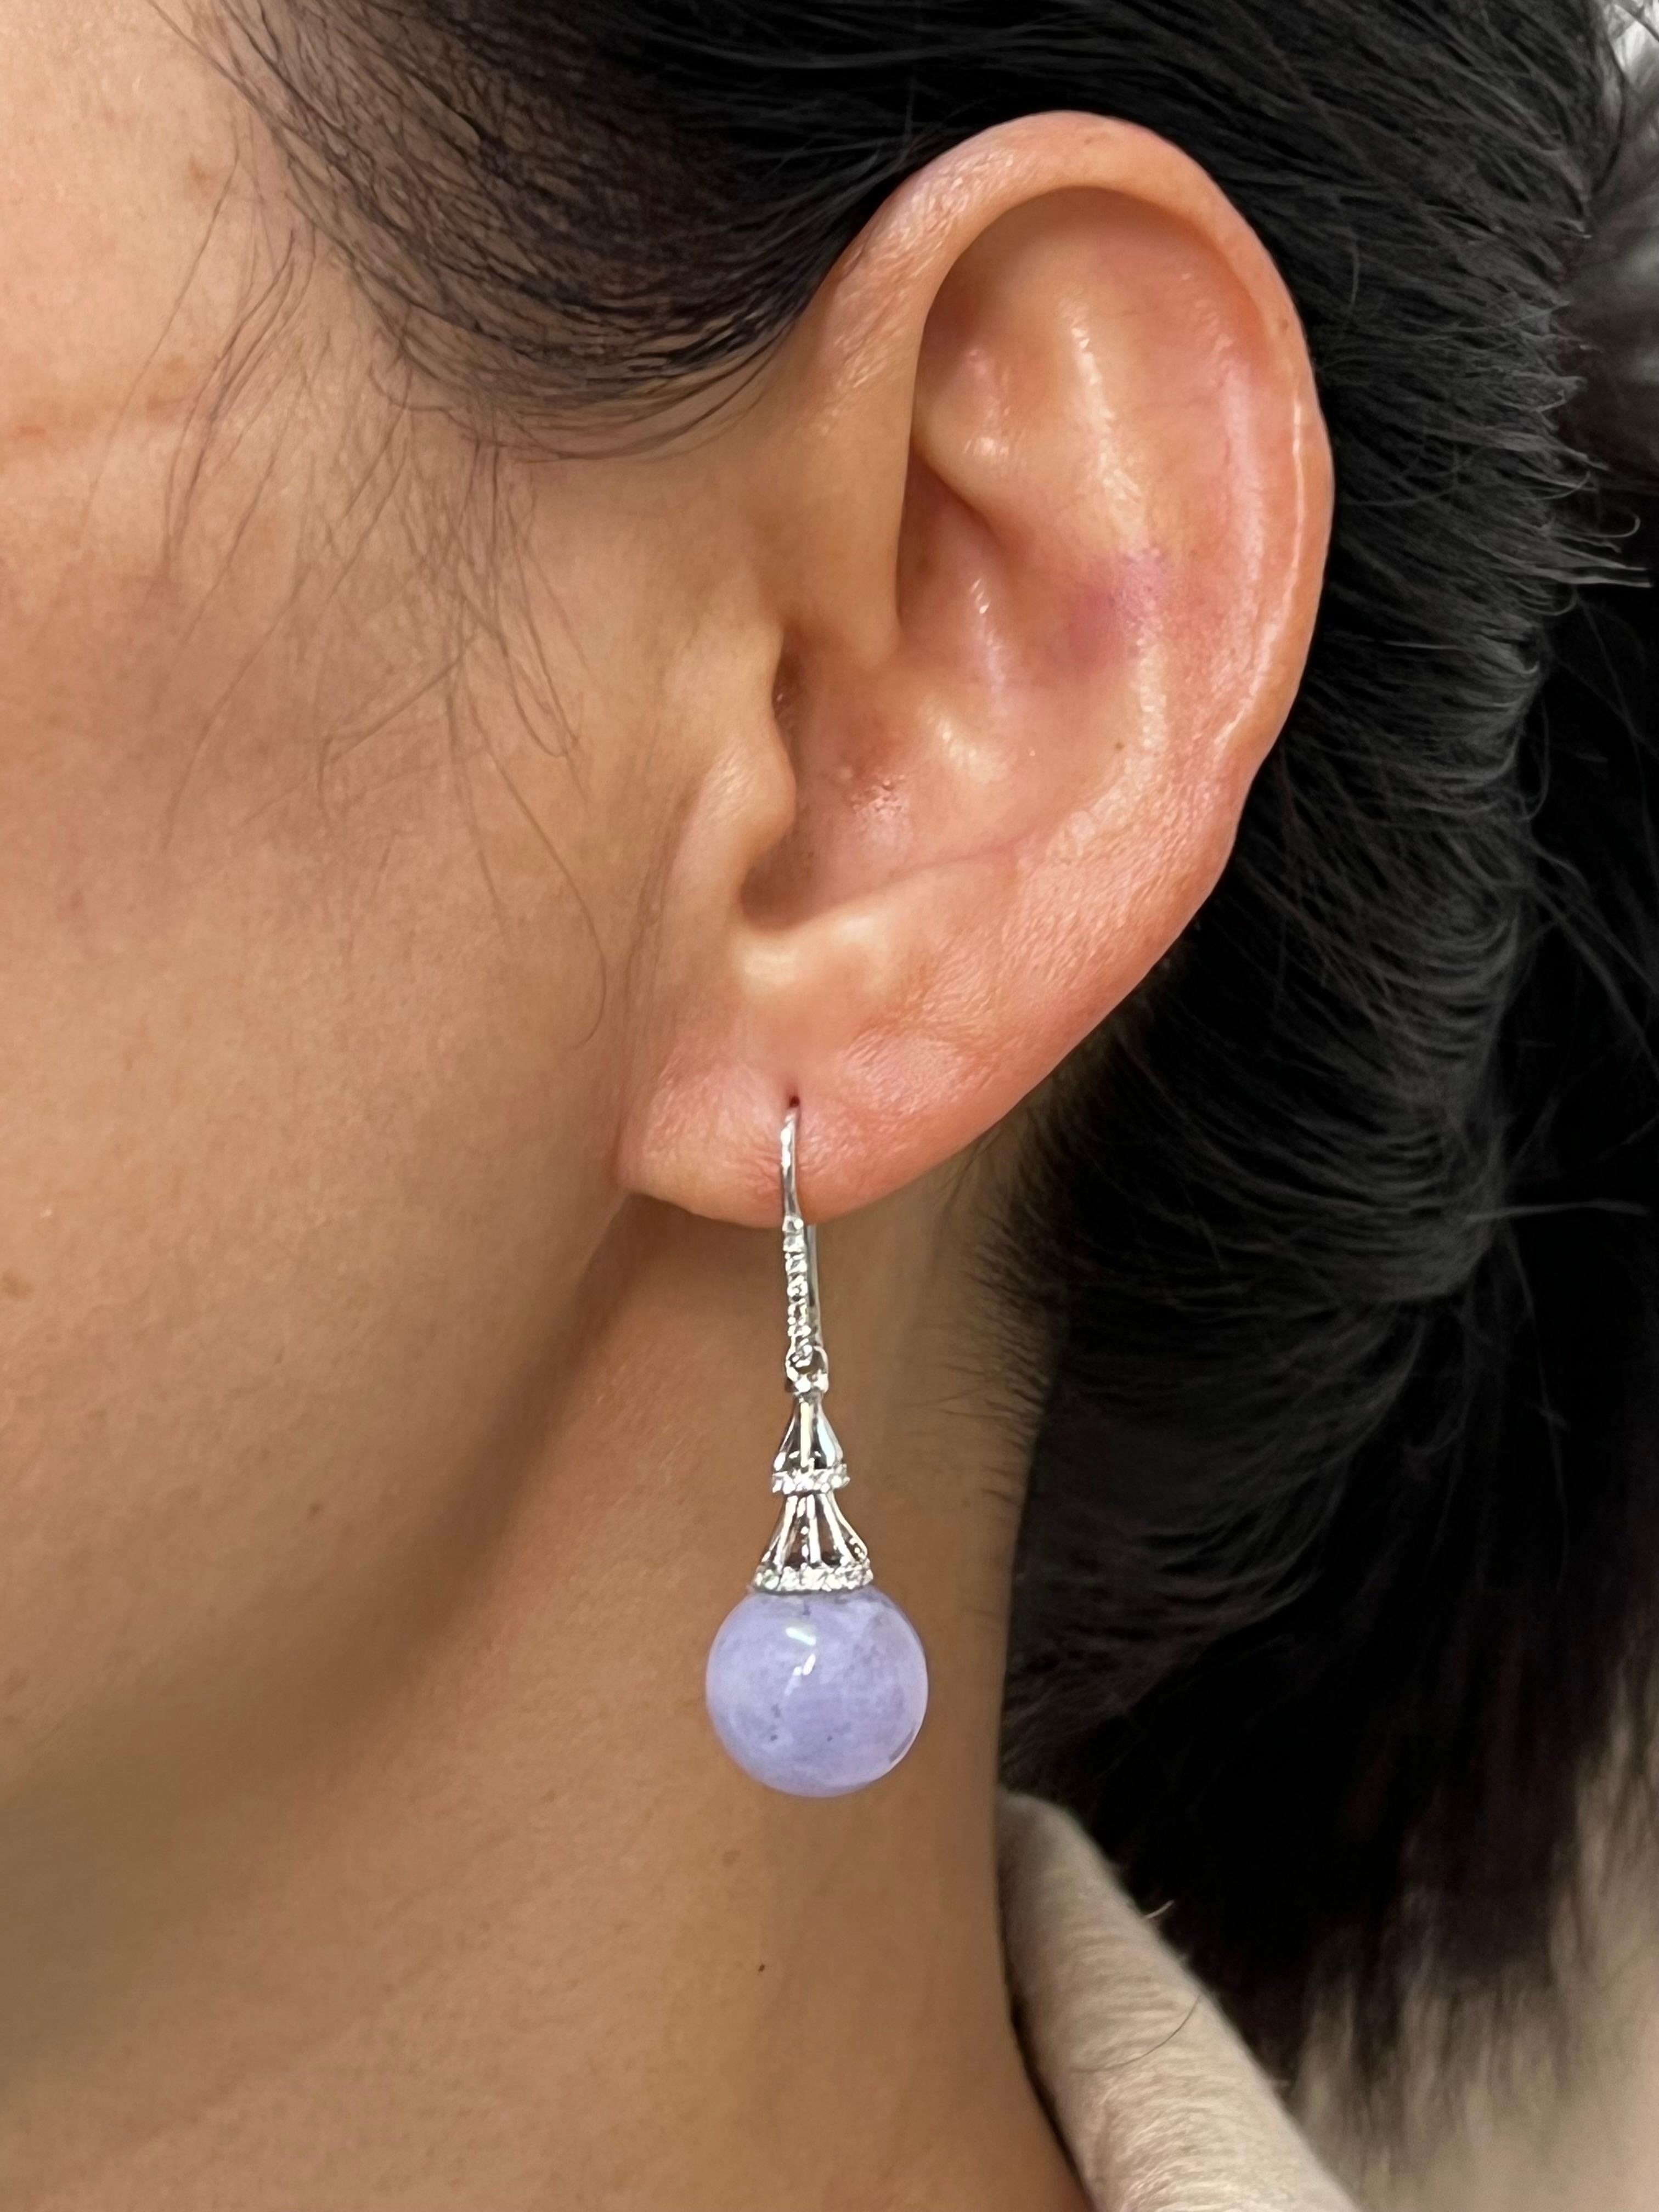 Please check out the HD video. This is a very special pair of drop earrings are well designed combined with top material. The lavender / purple jade beads in these earrings are certified to be natural. The earrings are set in 18k white gold. The 2